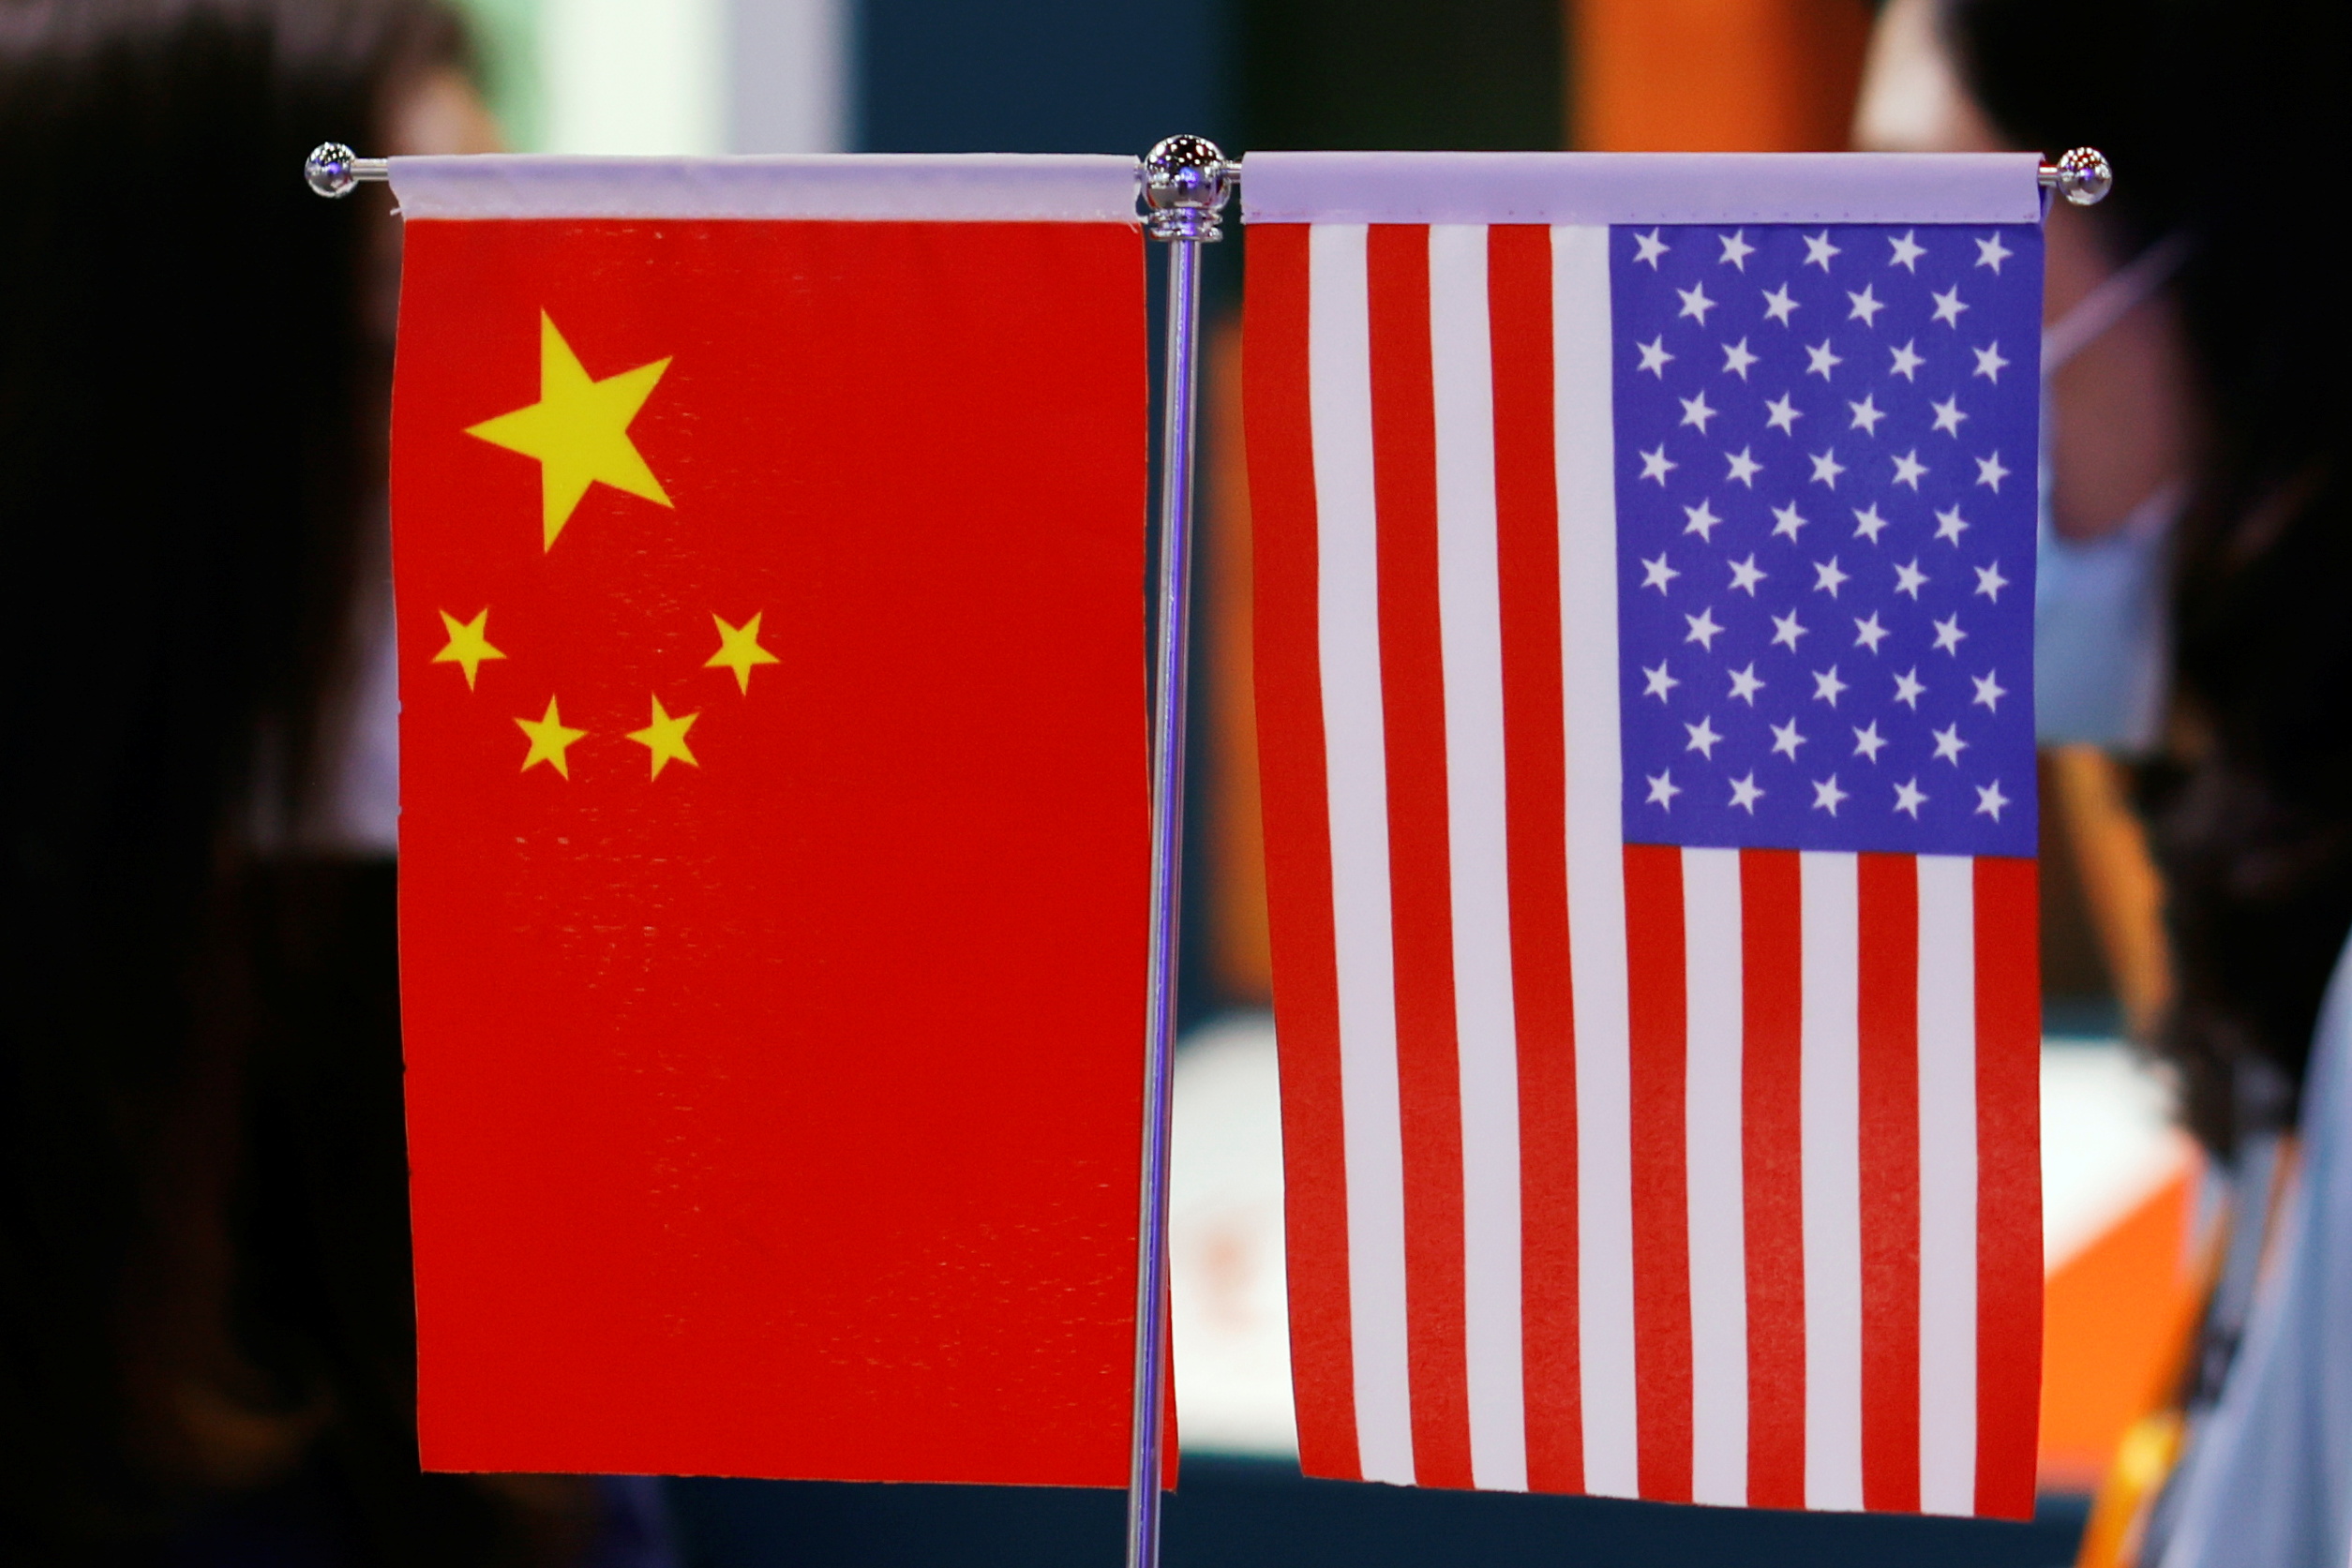 Chinese and U.S. flags displayed at the 2021 China International Fair for Trade in Services (CIFTIS) in Beijing, China September 4, 2021. REUTERS/Florence Lo